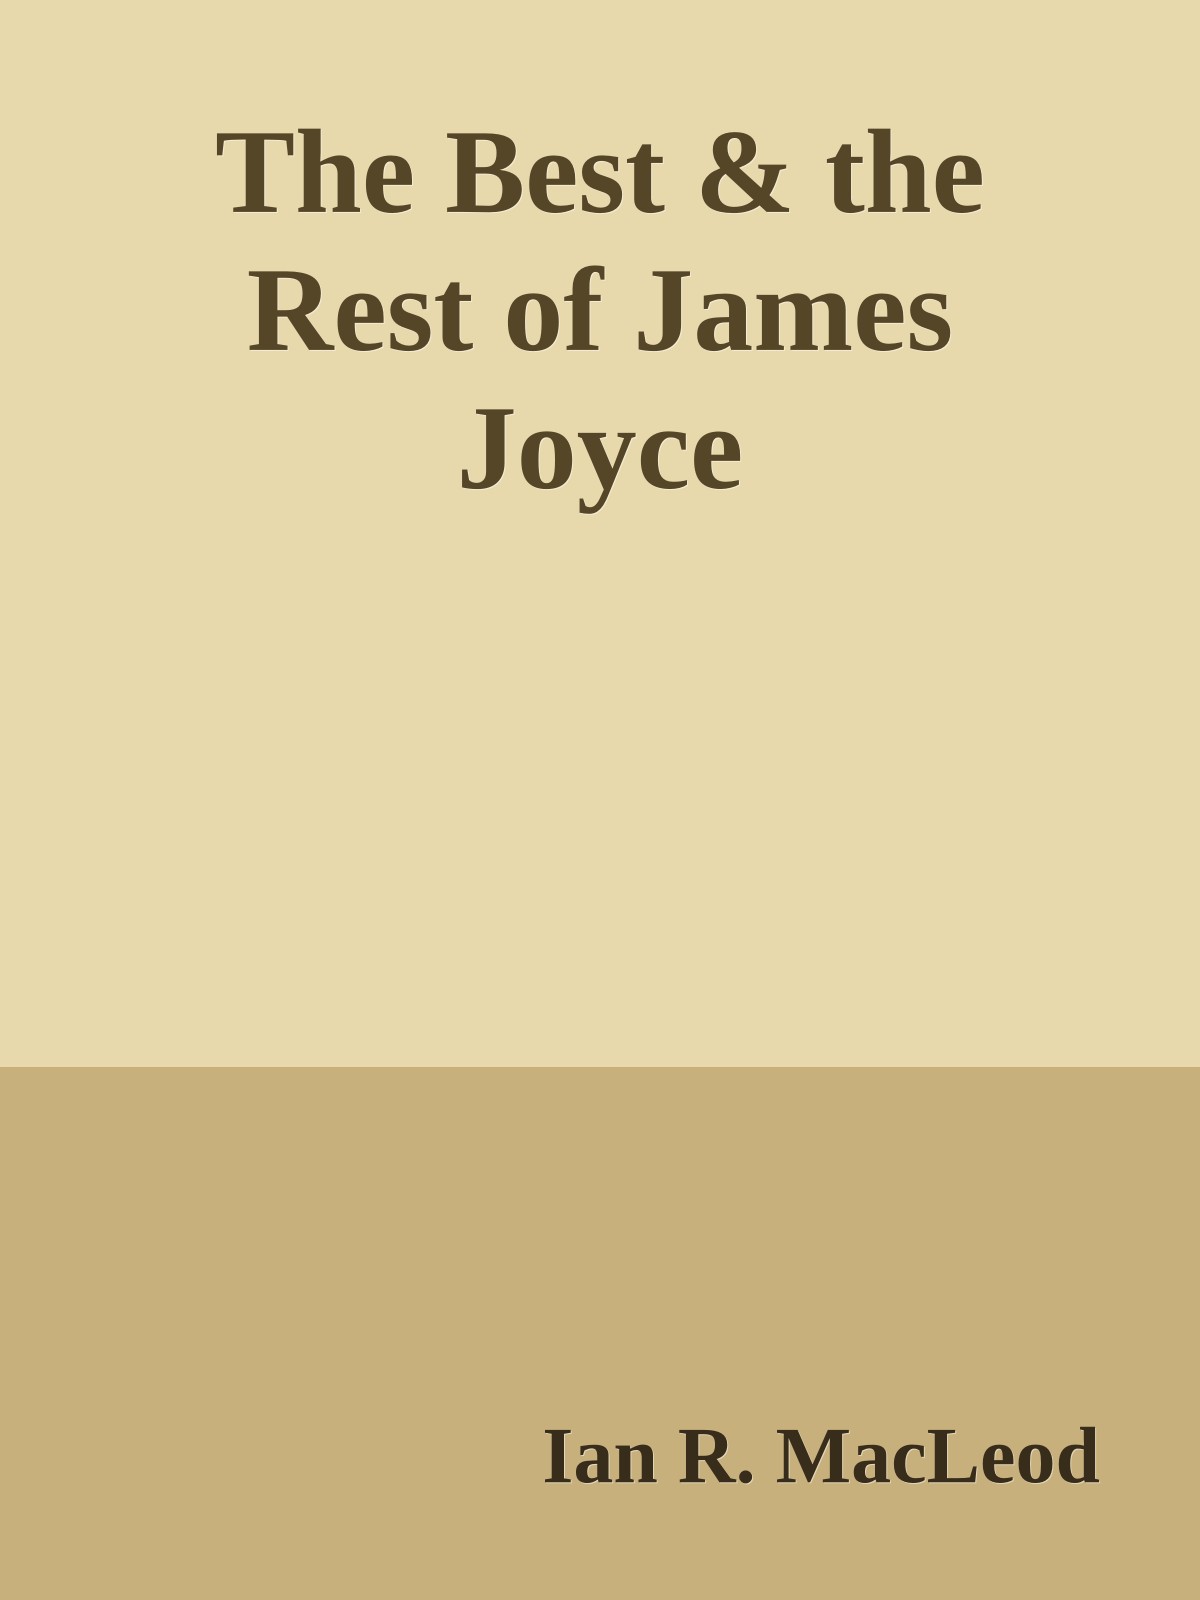 The Best & the Rest of James Joyce